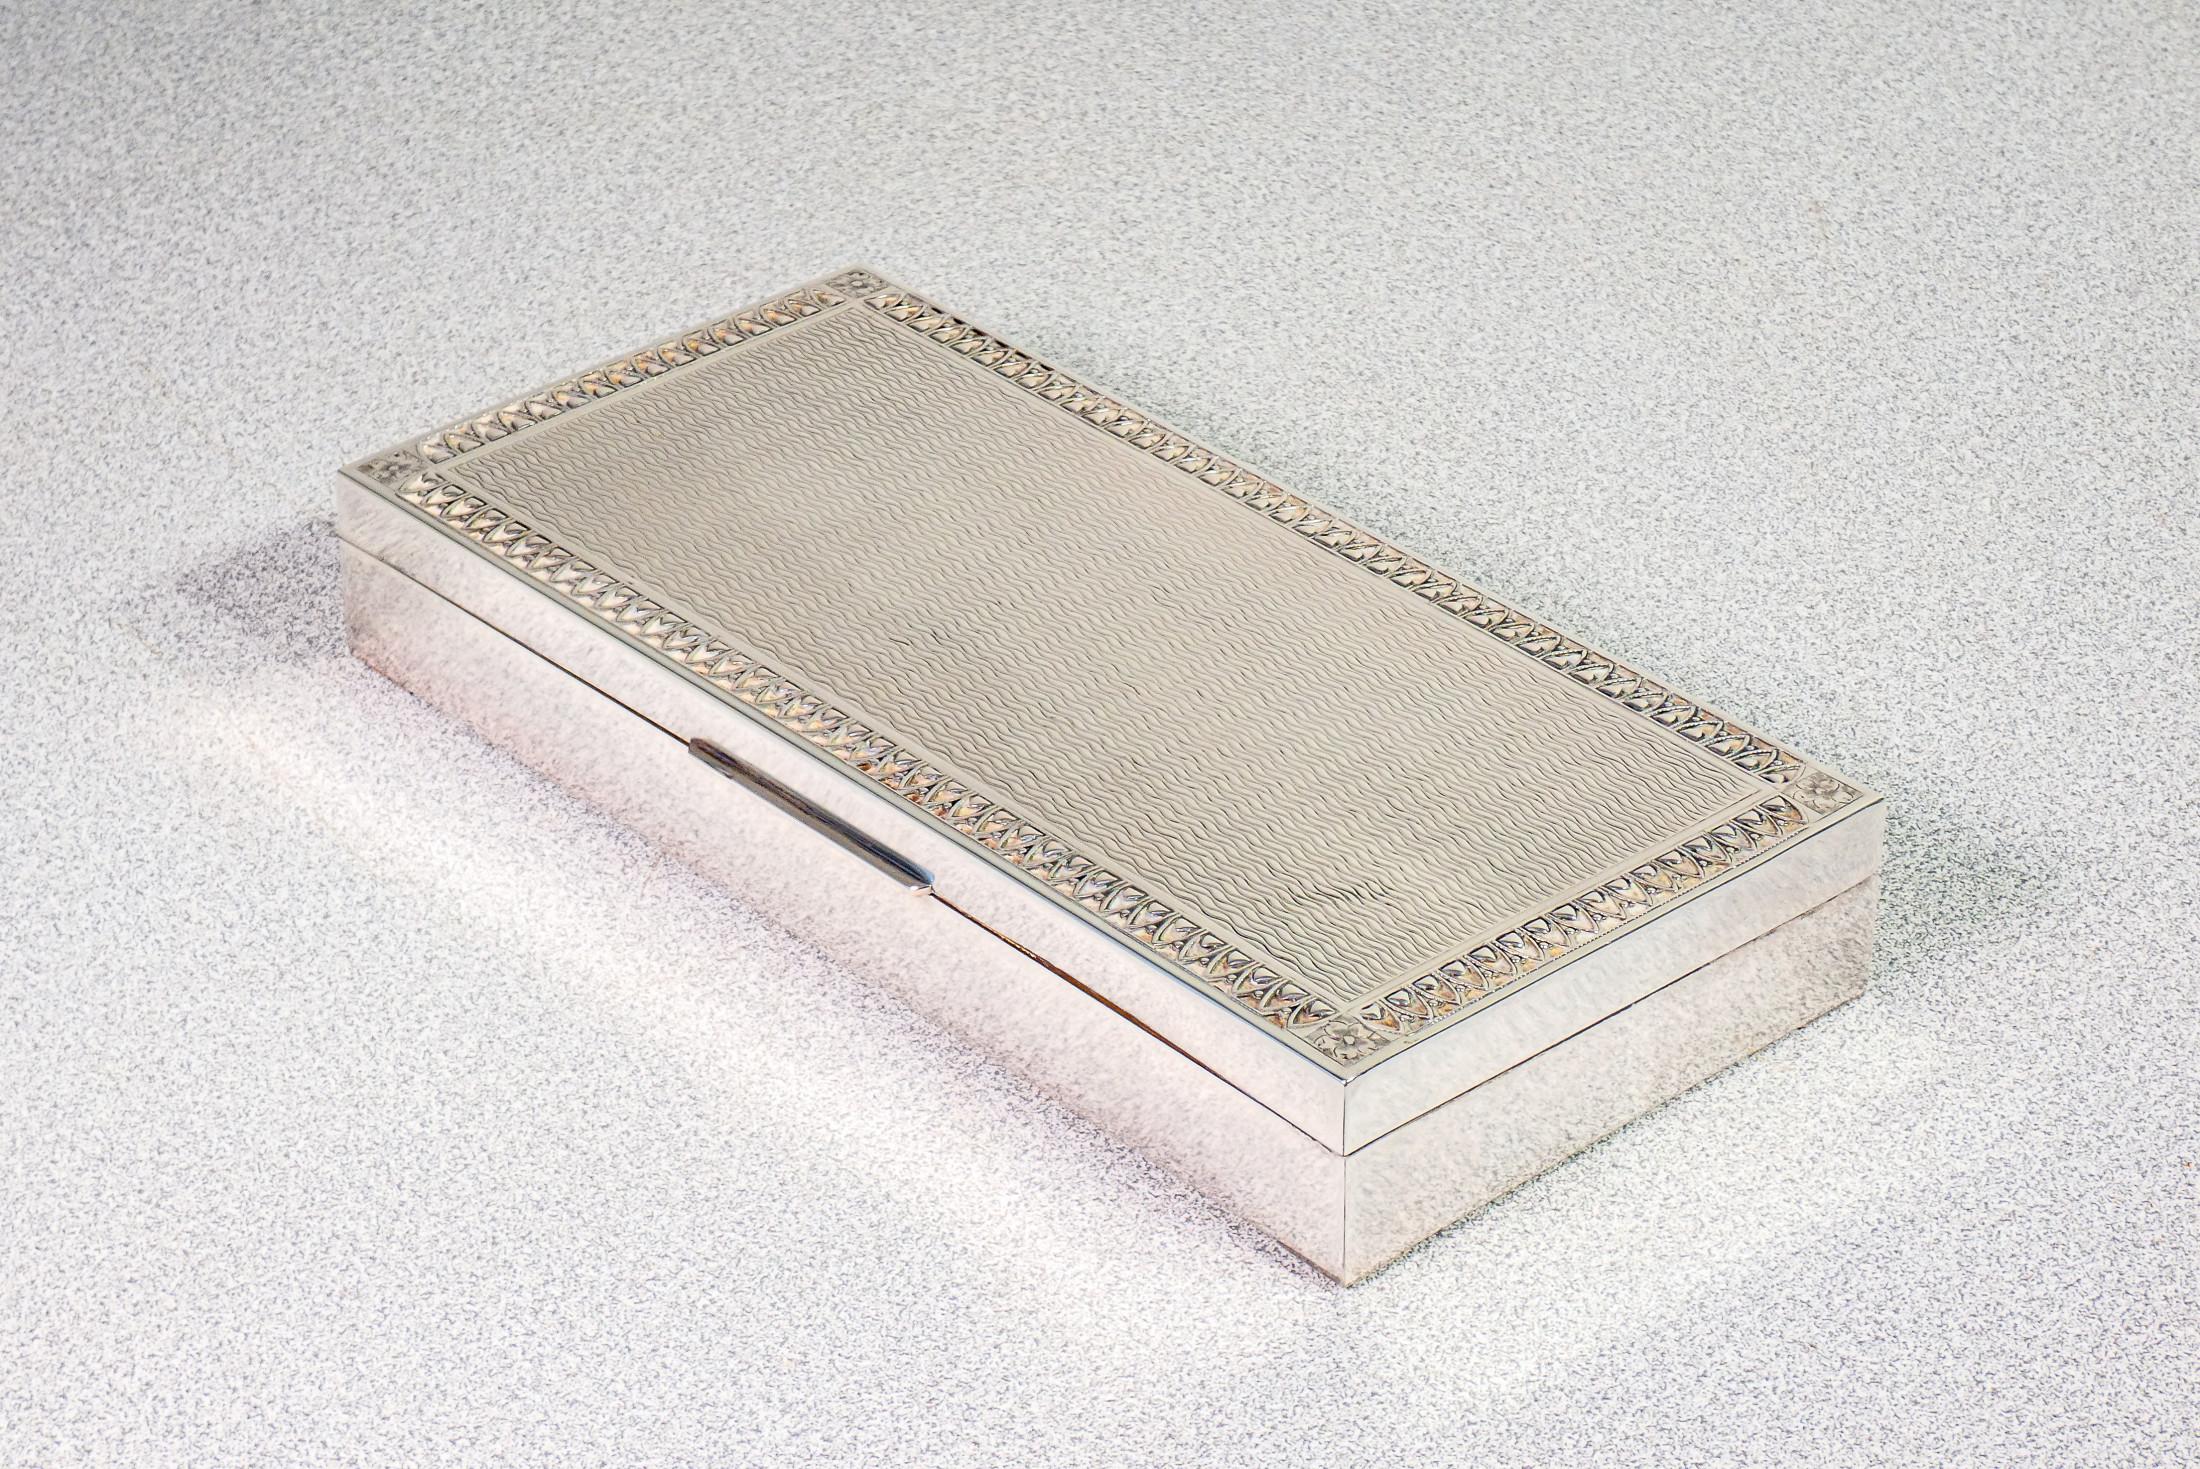 20th Century Box in 800 Silver and Wood, Cigarette Case or Jewelry Box, Italy, Mid-20th C